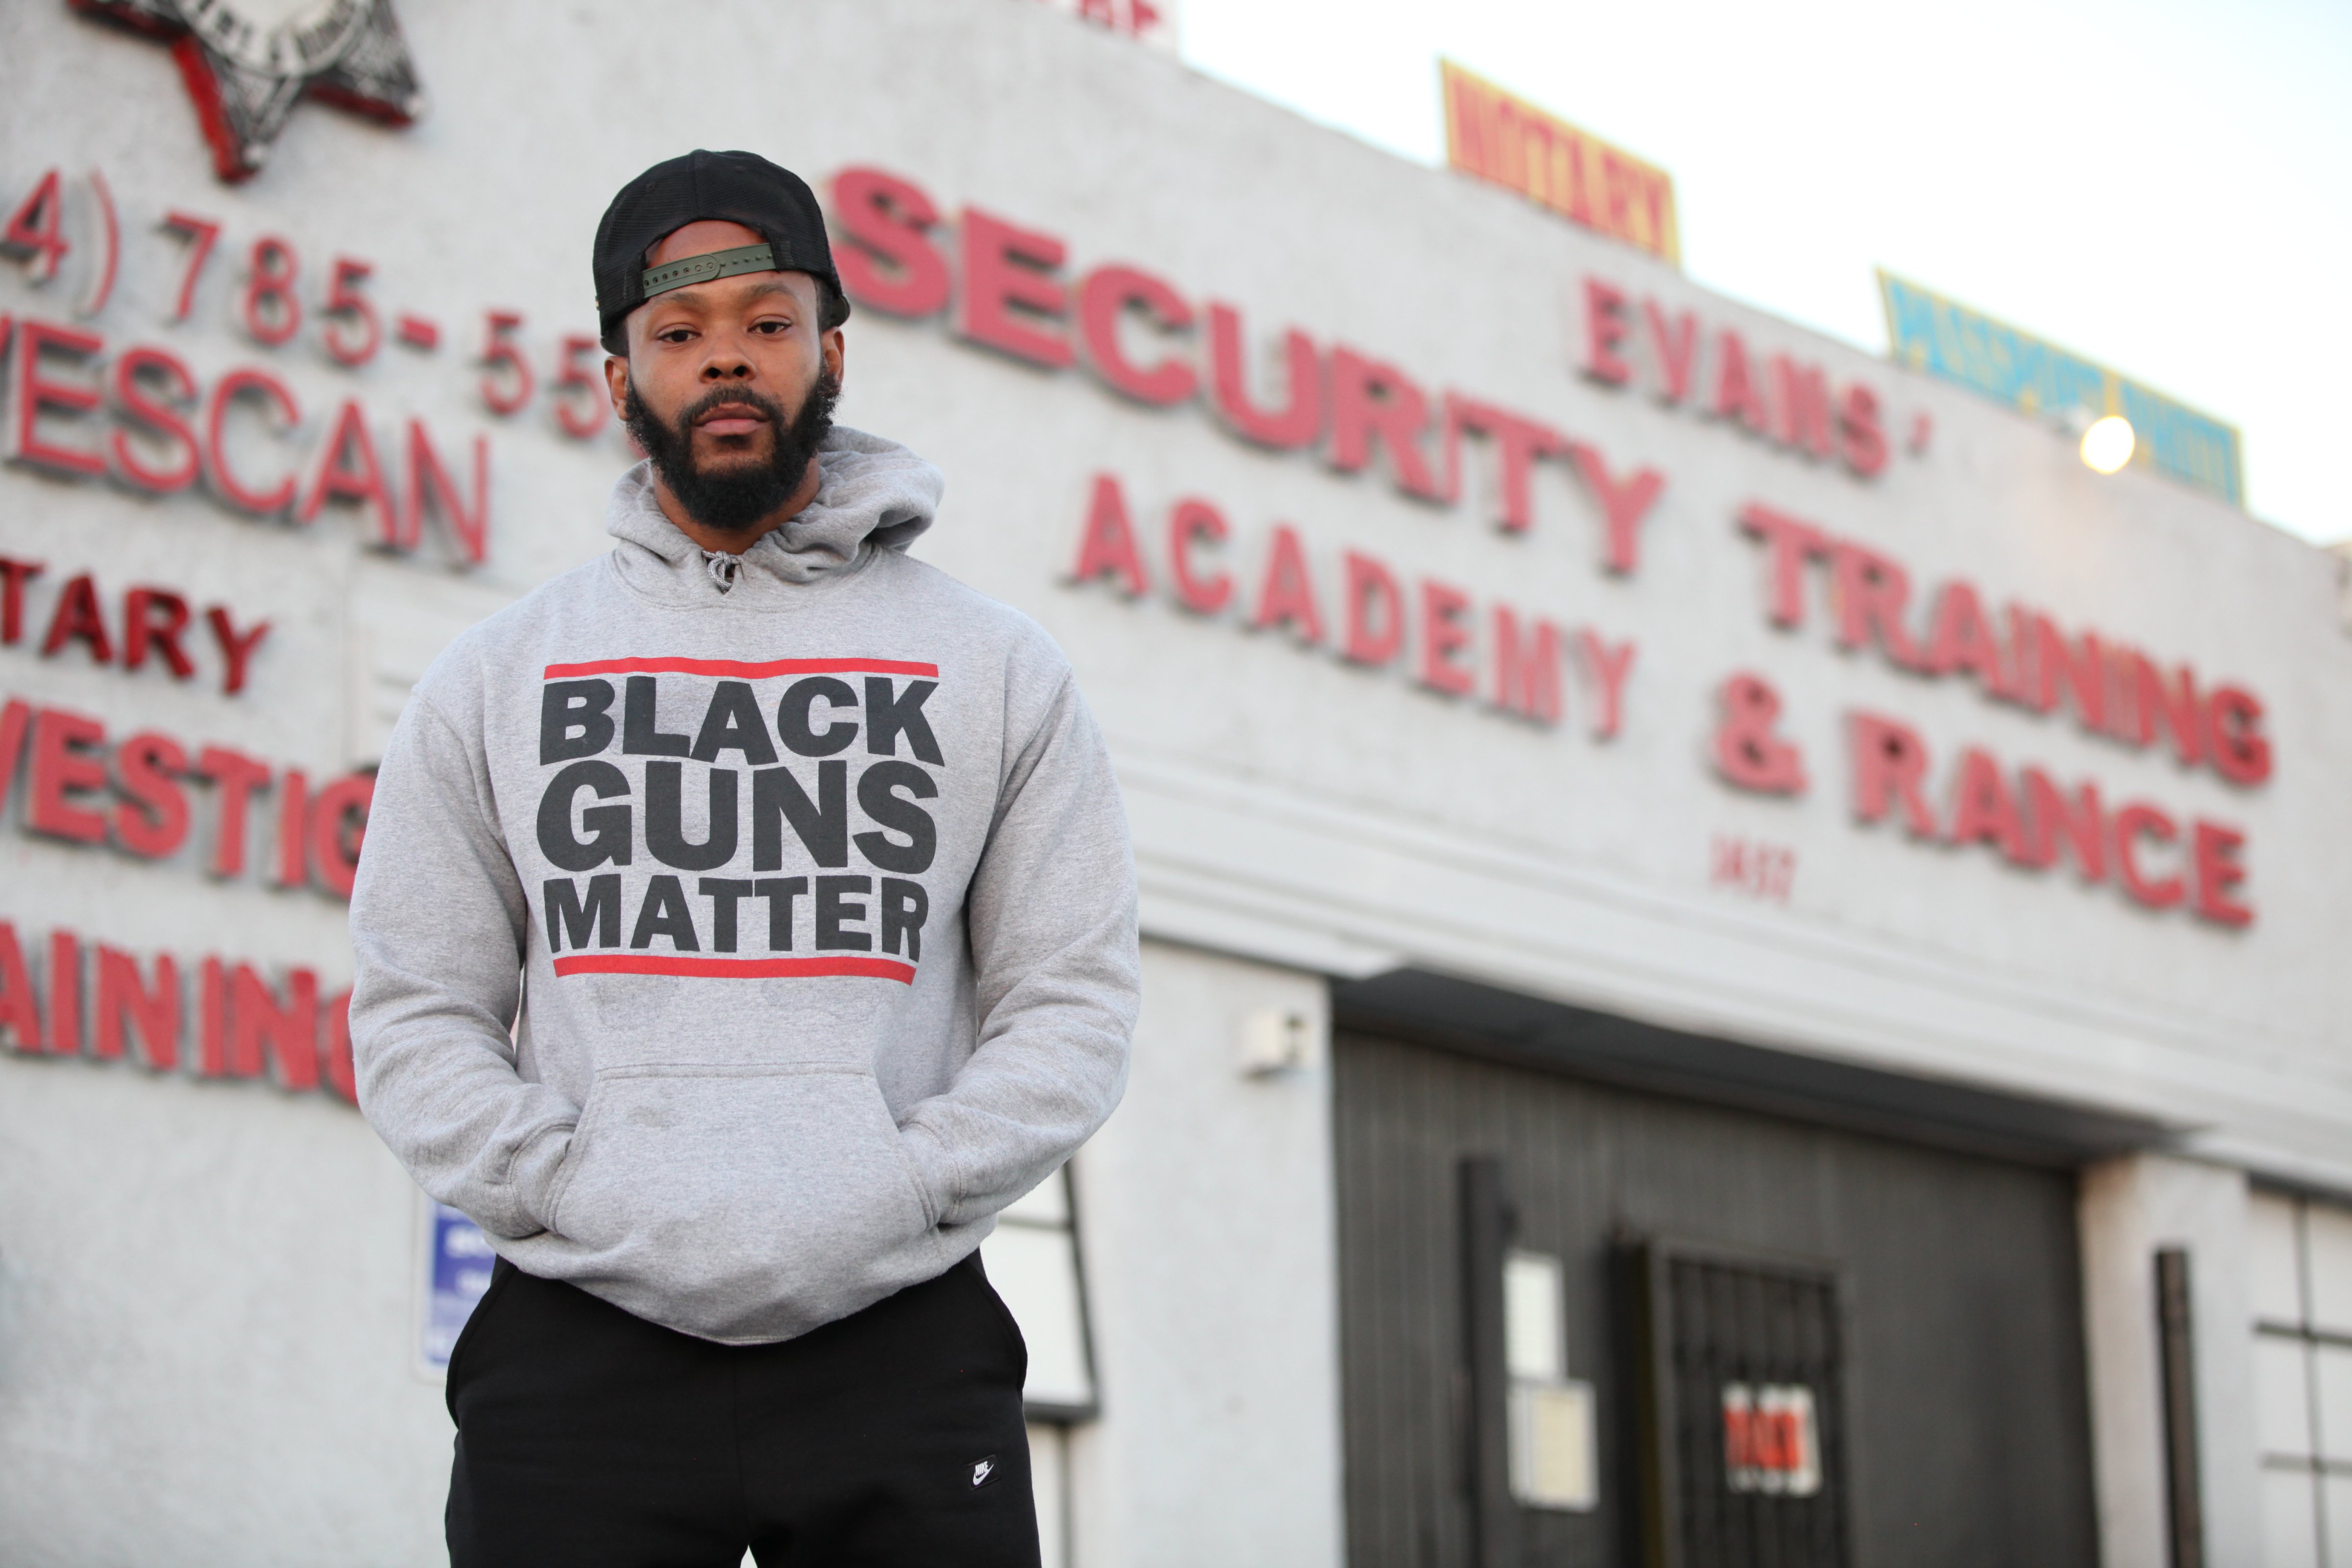 Black Guns Matter founder Maj Toure in Los Angeles in December 2016. (Ruaridh Connellan—Barcroft Images/Getty Images)